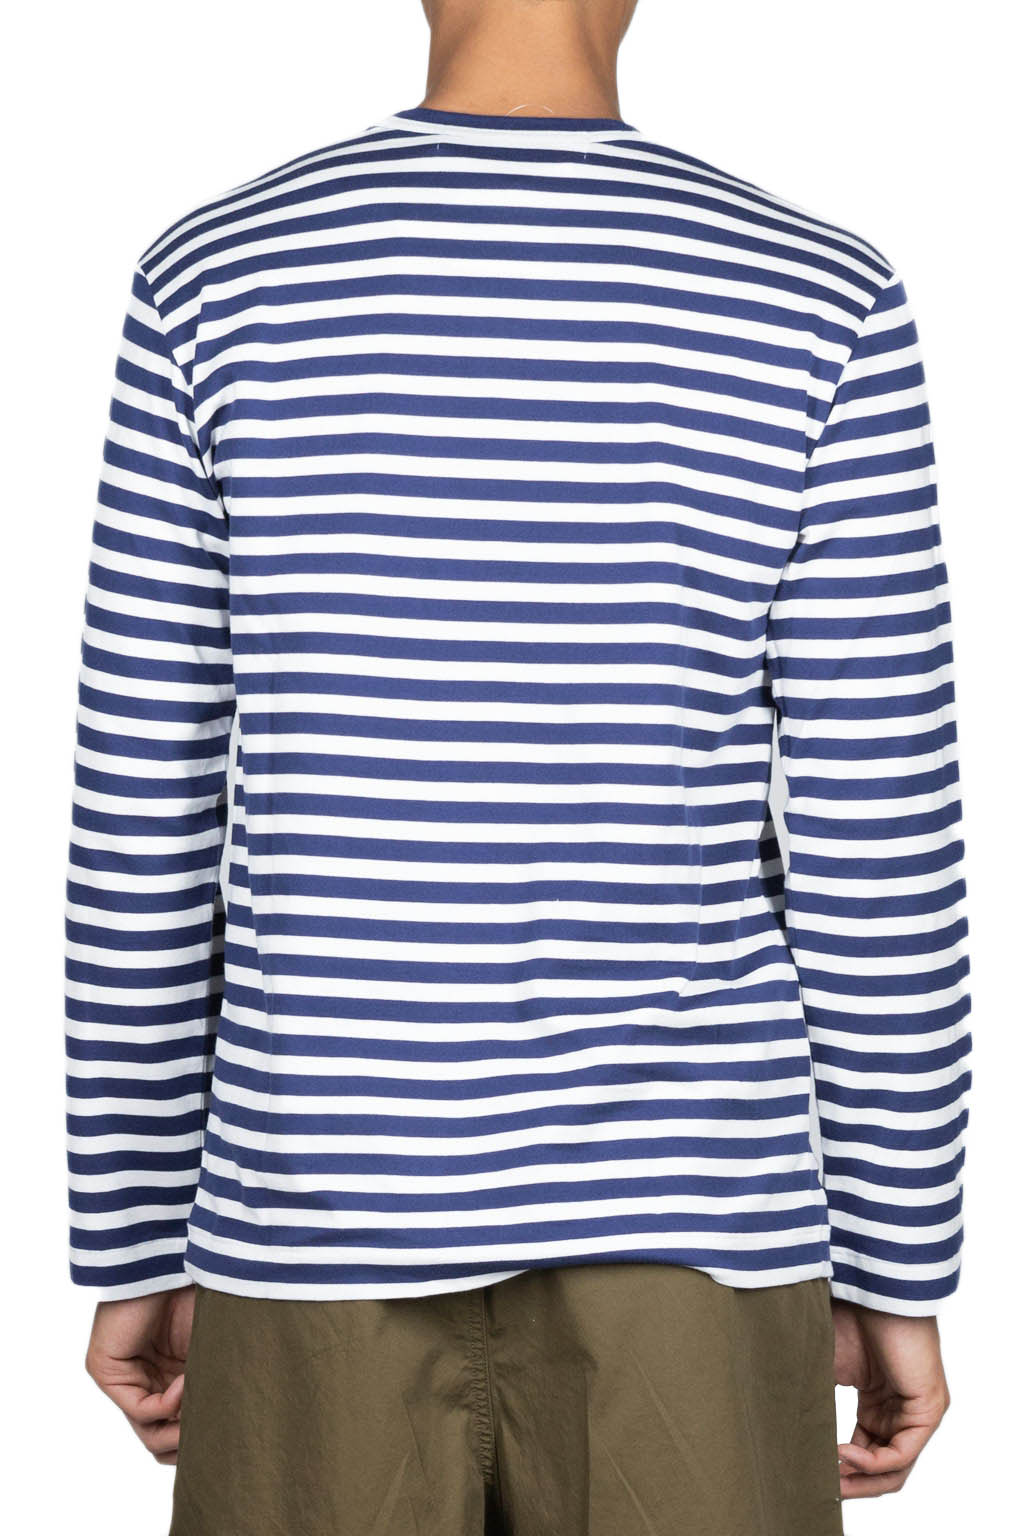 Comme Des Garcons Play Red Heart Striped LS T-Shirt - Navy x White